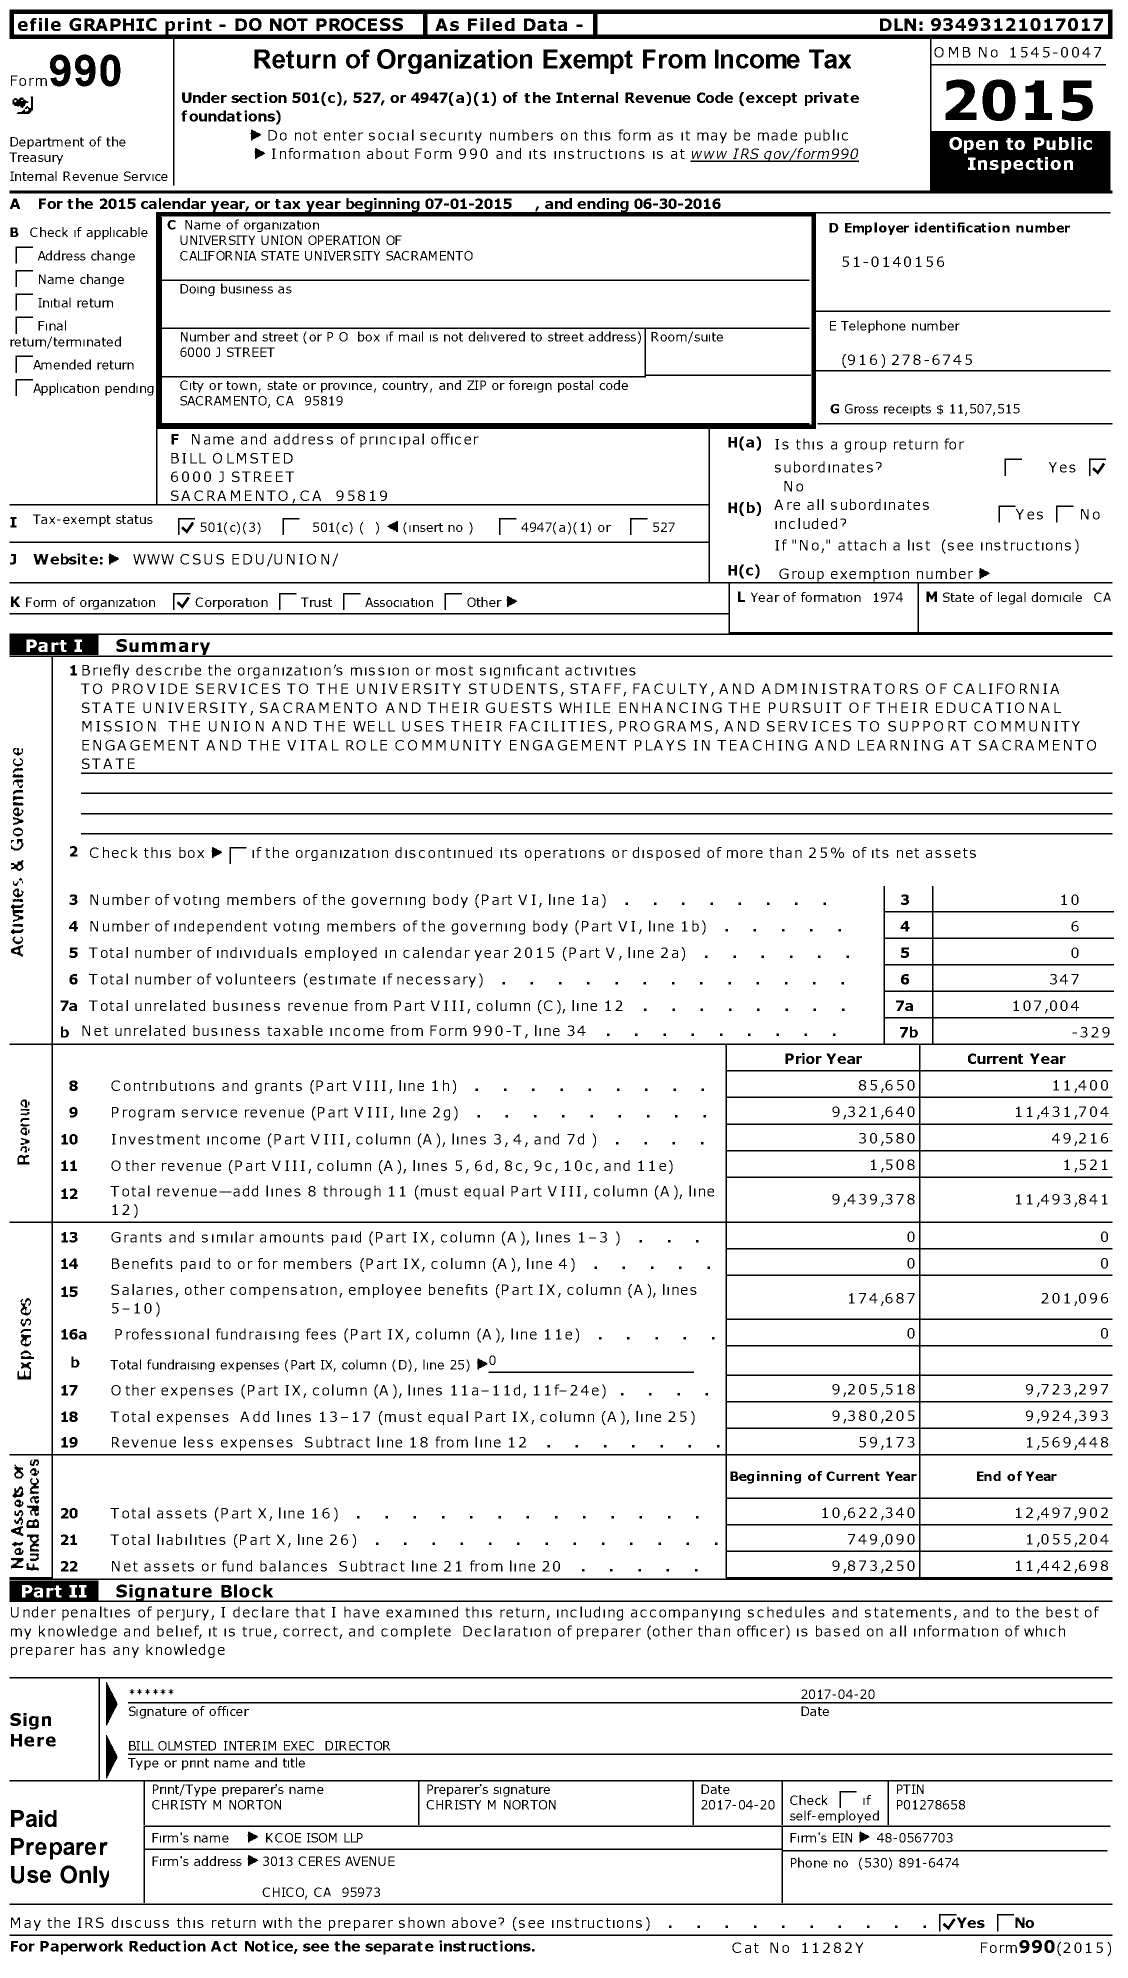 Image of first page of 2015 Form 990 for University Union Operation of California University Sacramento